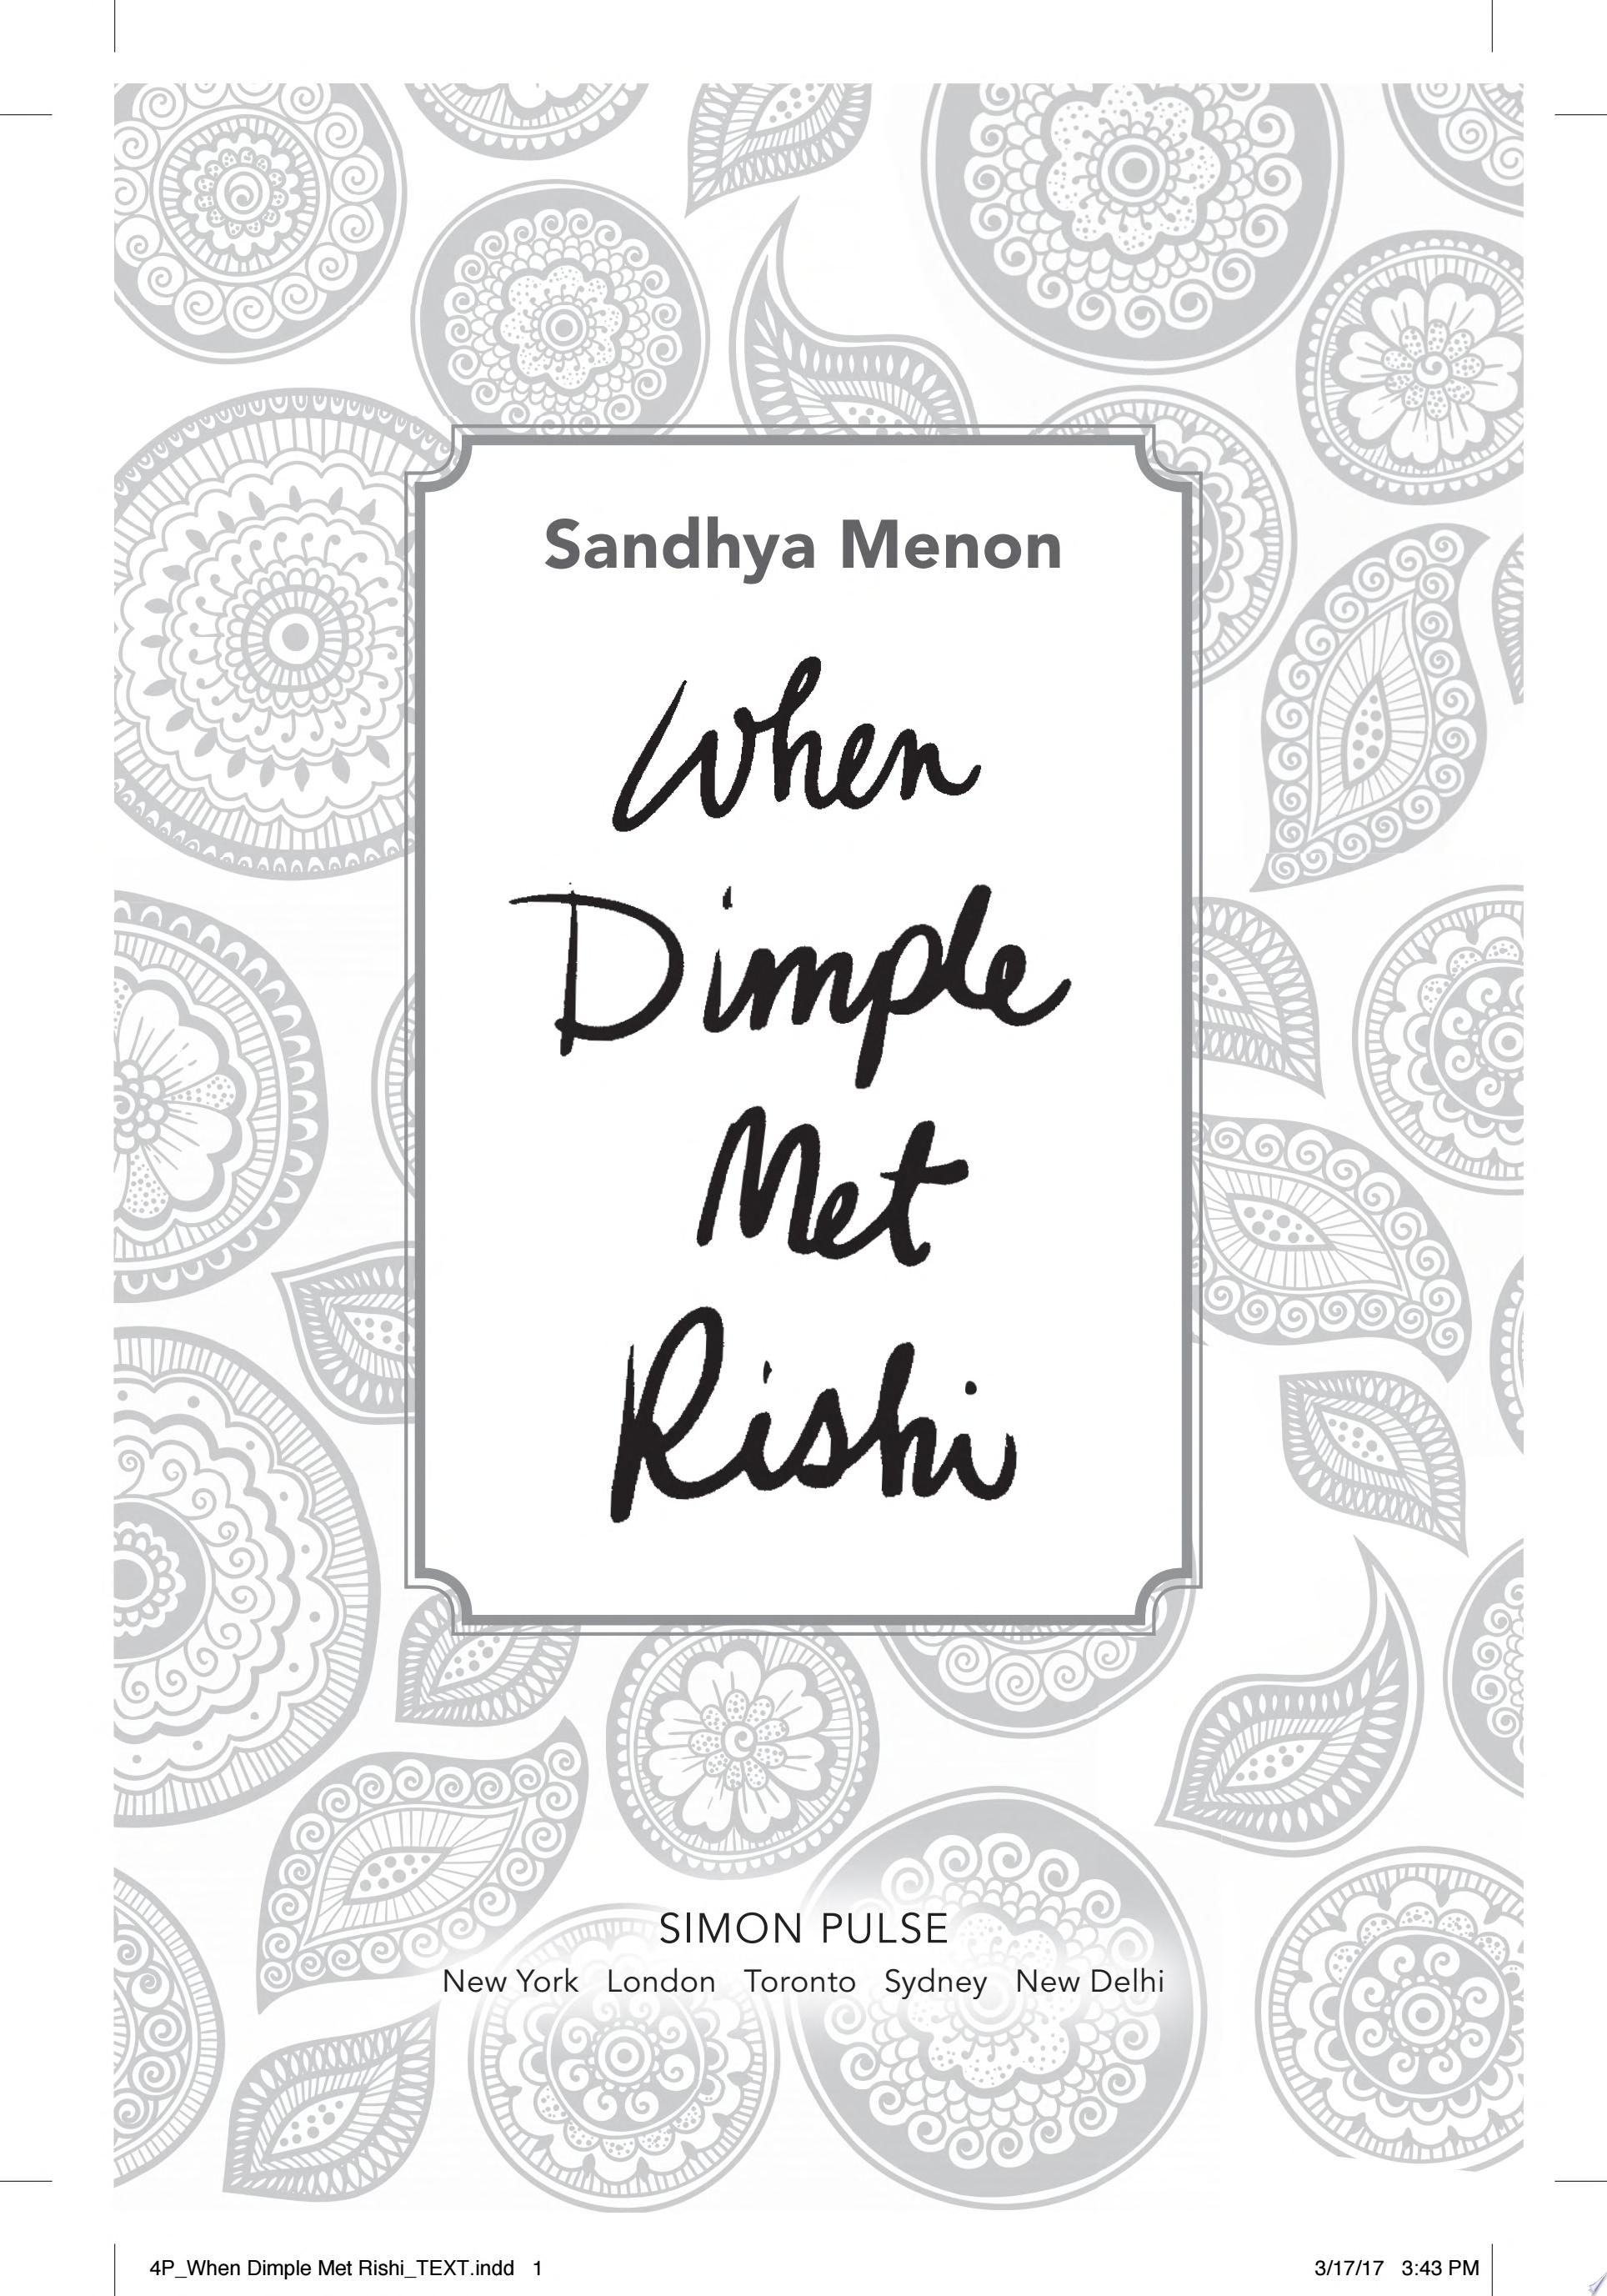 Image for "When Dimple Met Rishi"